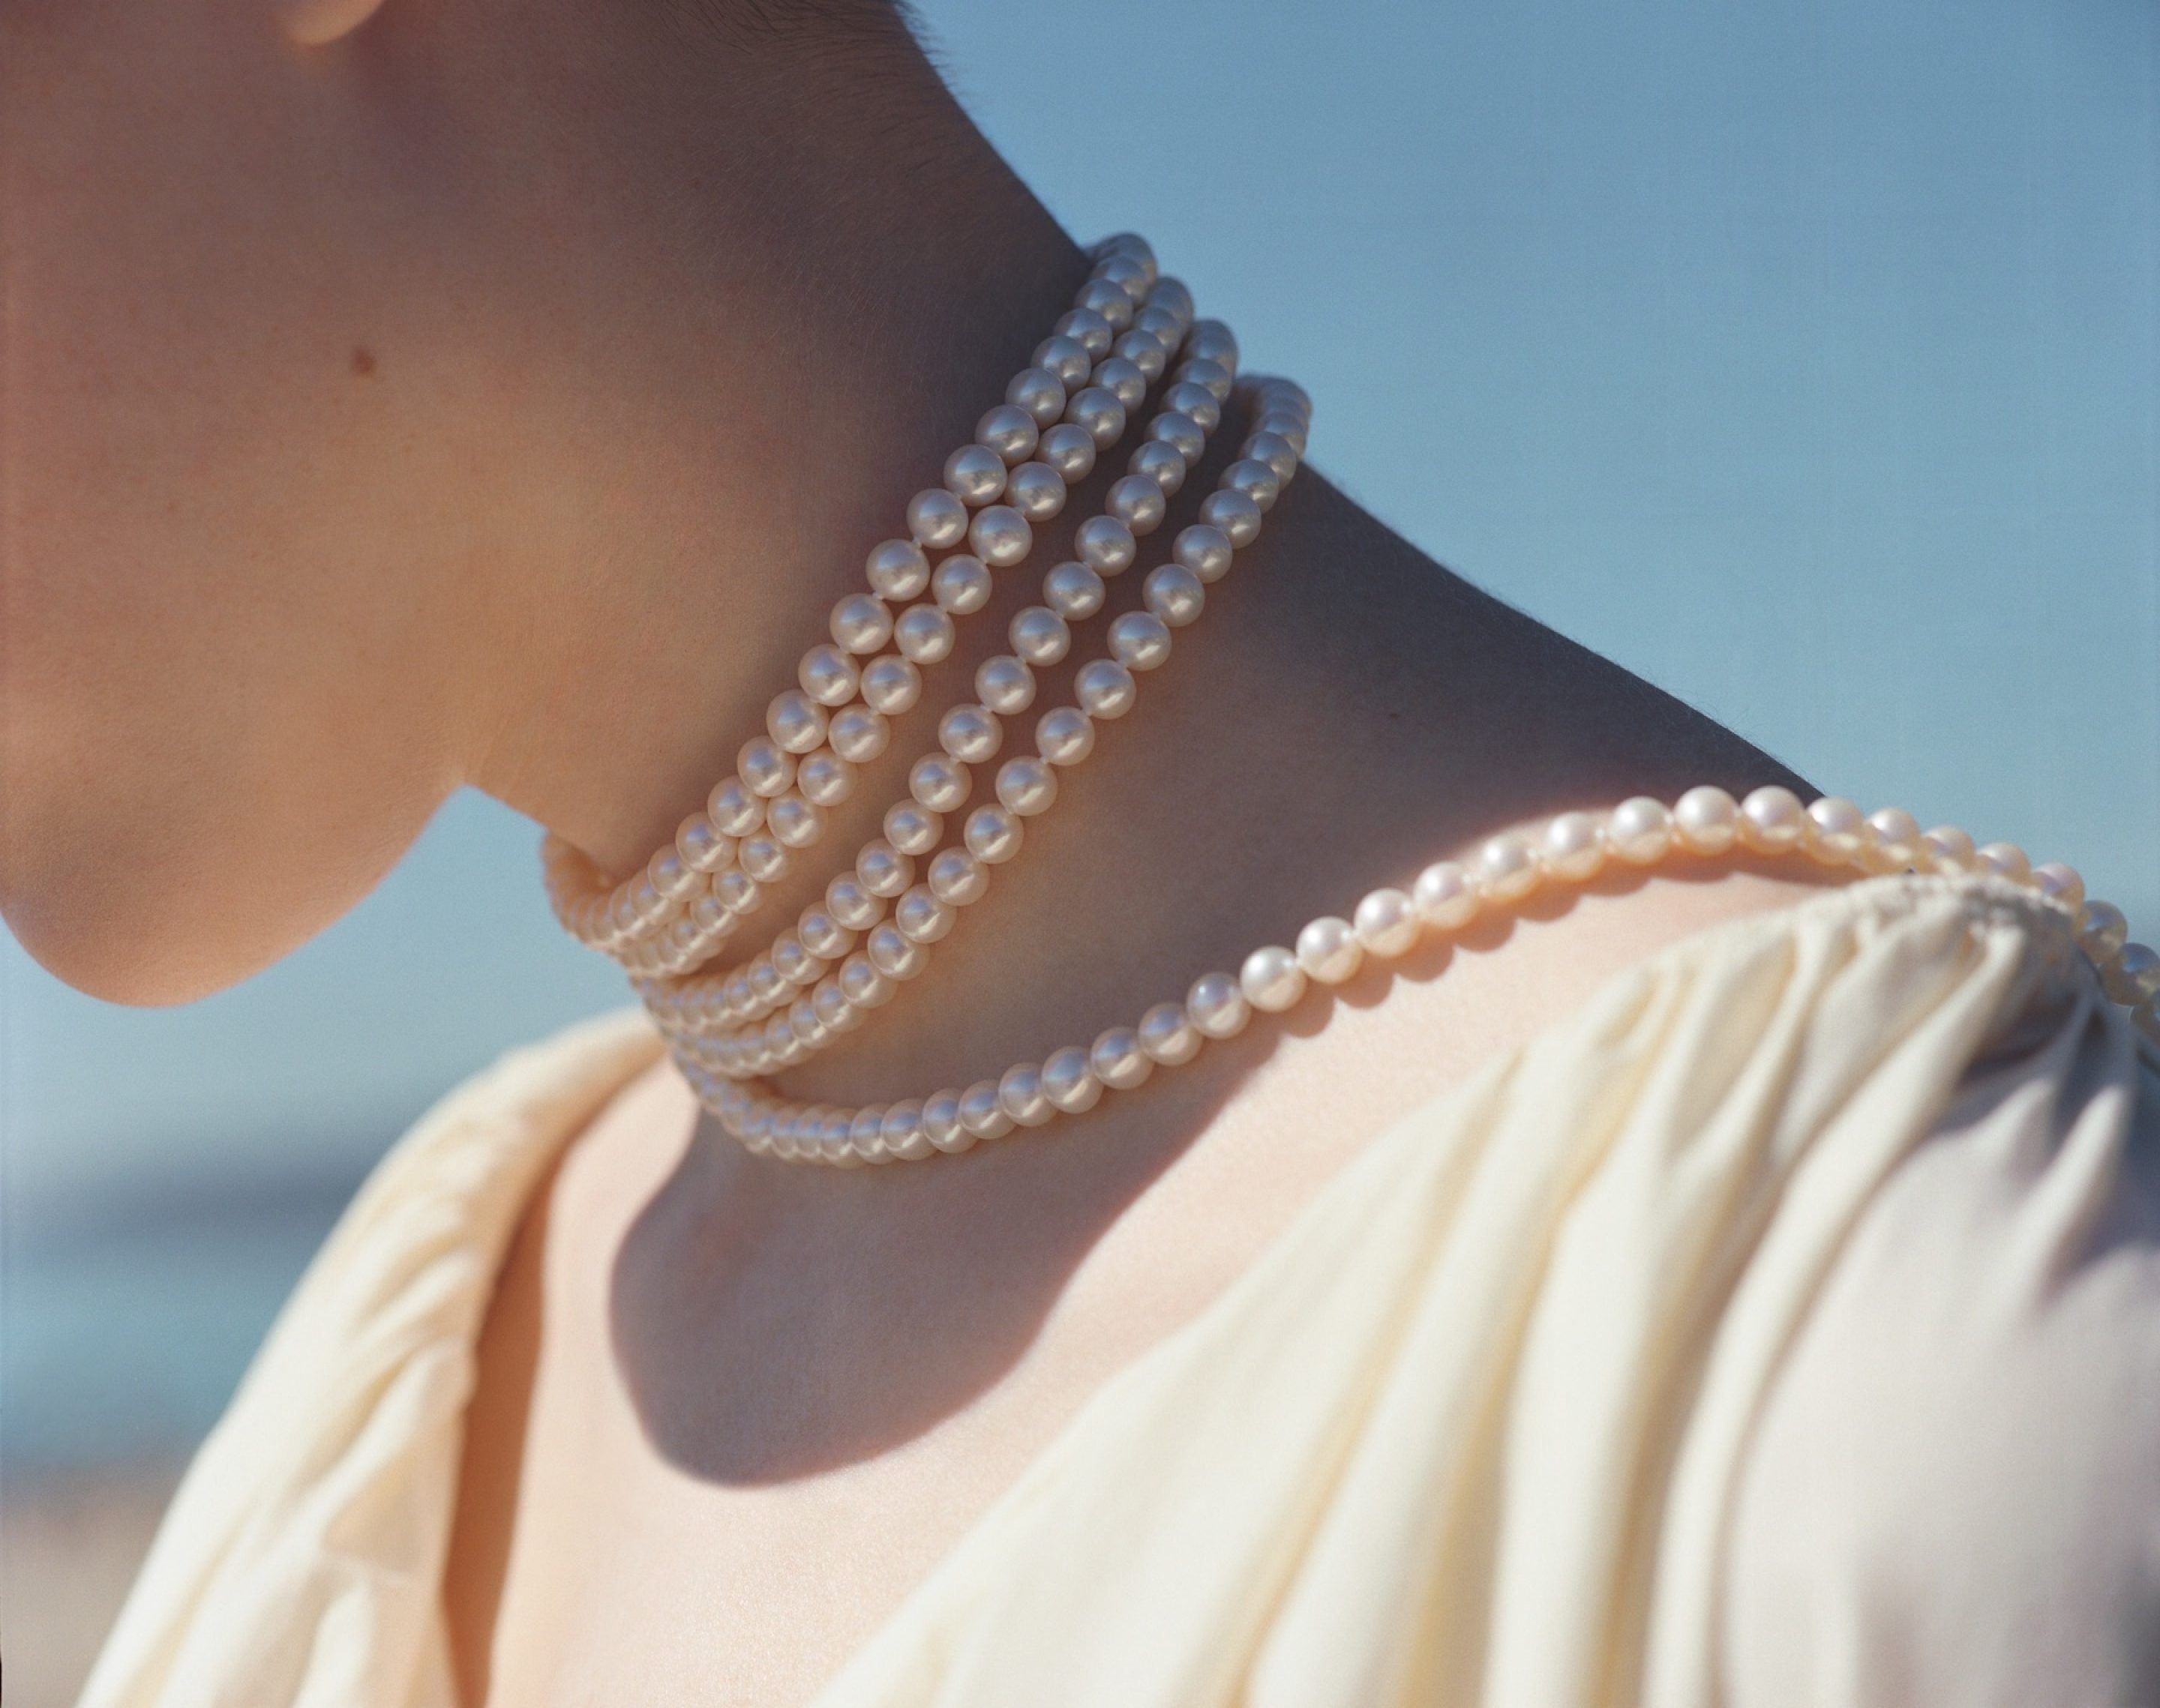 Pearl necklace nsfw